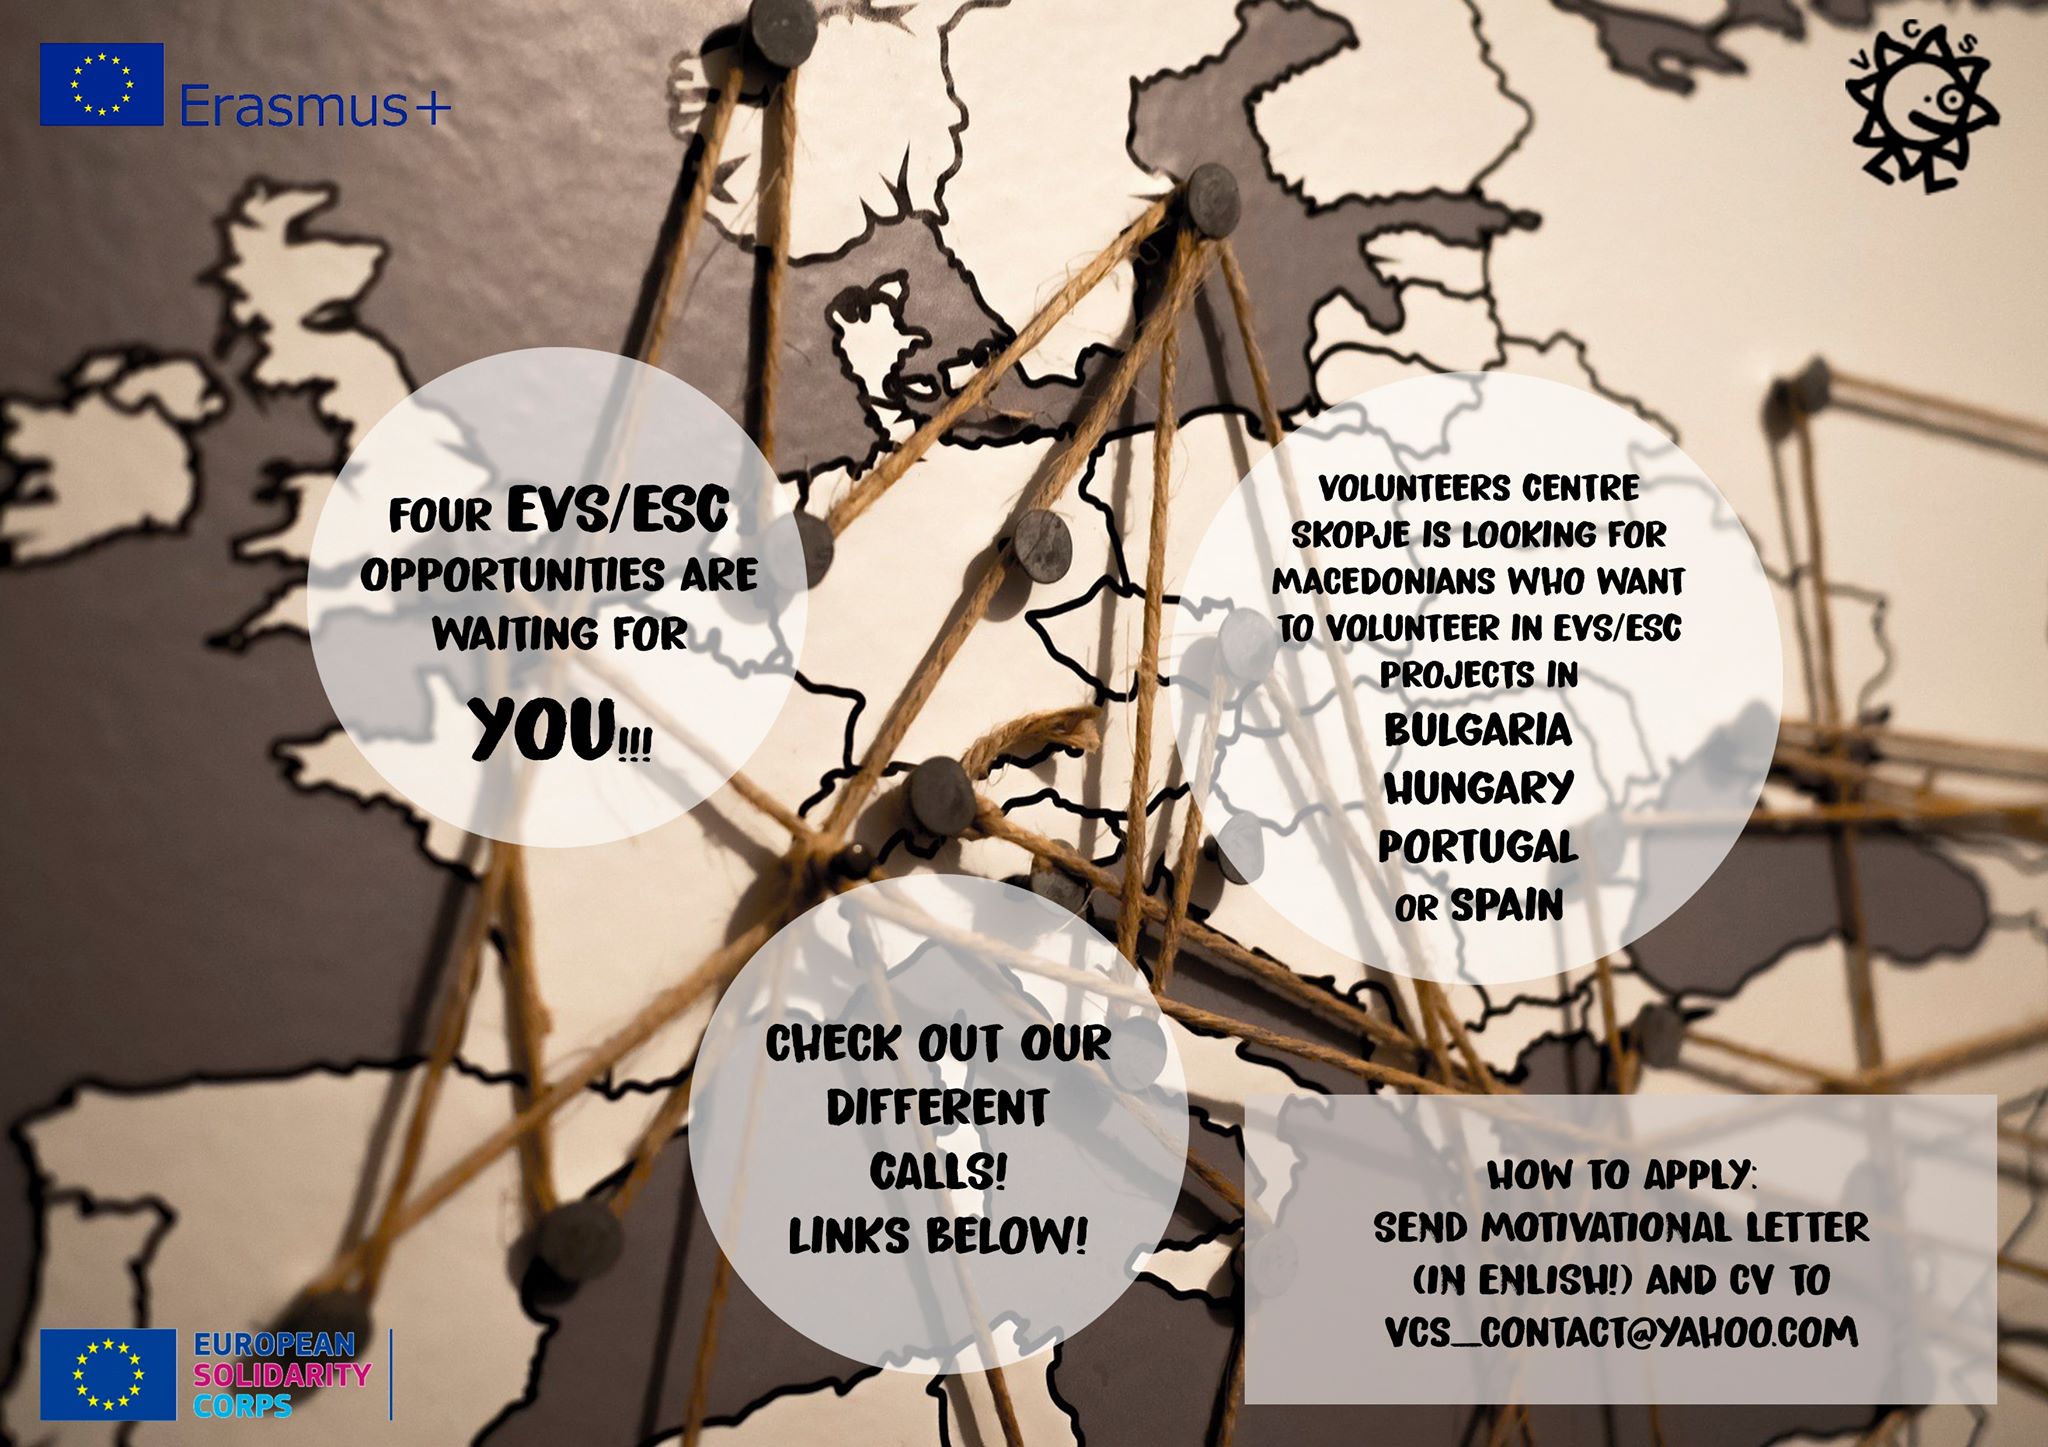 You are currently viewing EVS/ESC Opportunities waiting for YOU !!!